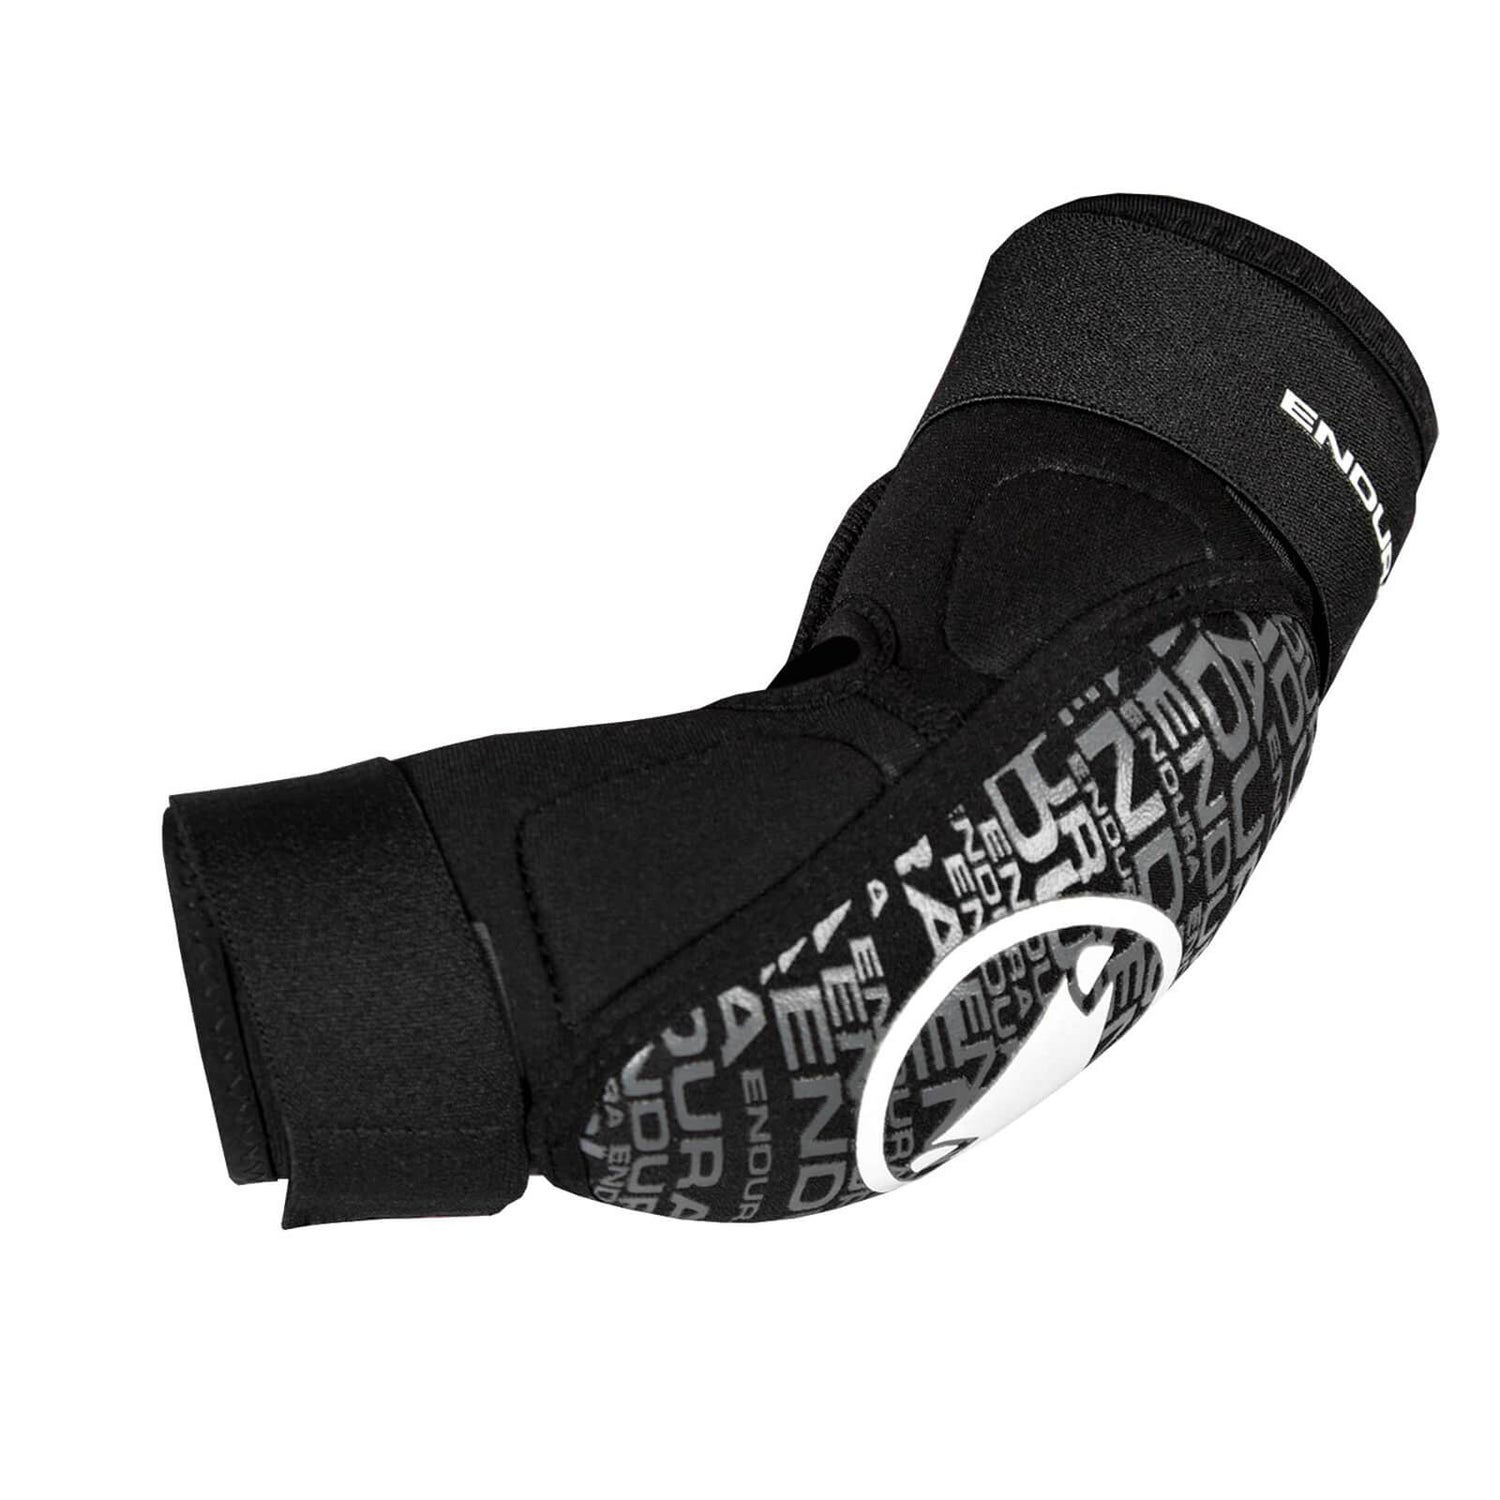 Kids's SingleTrack Youth Elbow Pads - Black - 9-10yrs